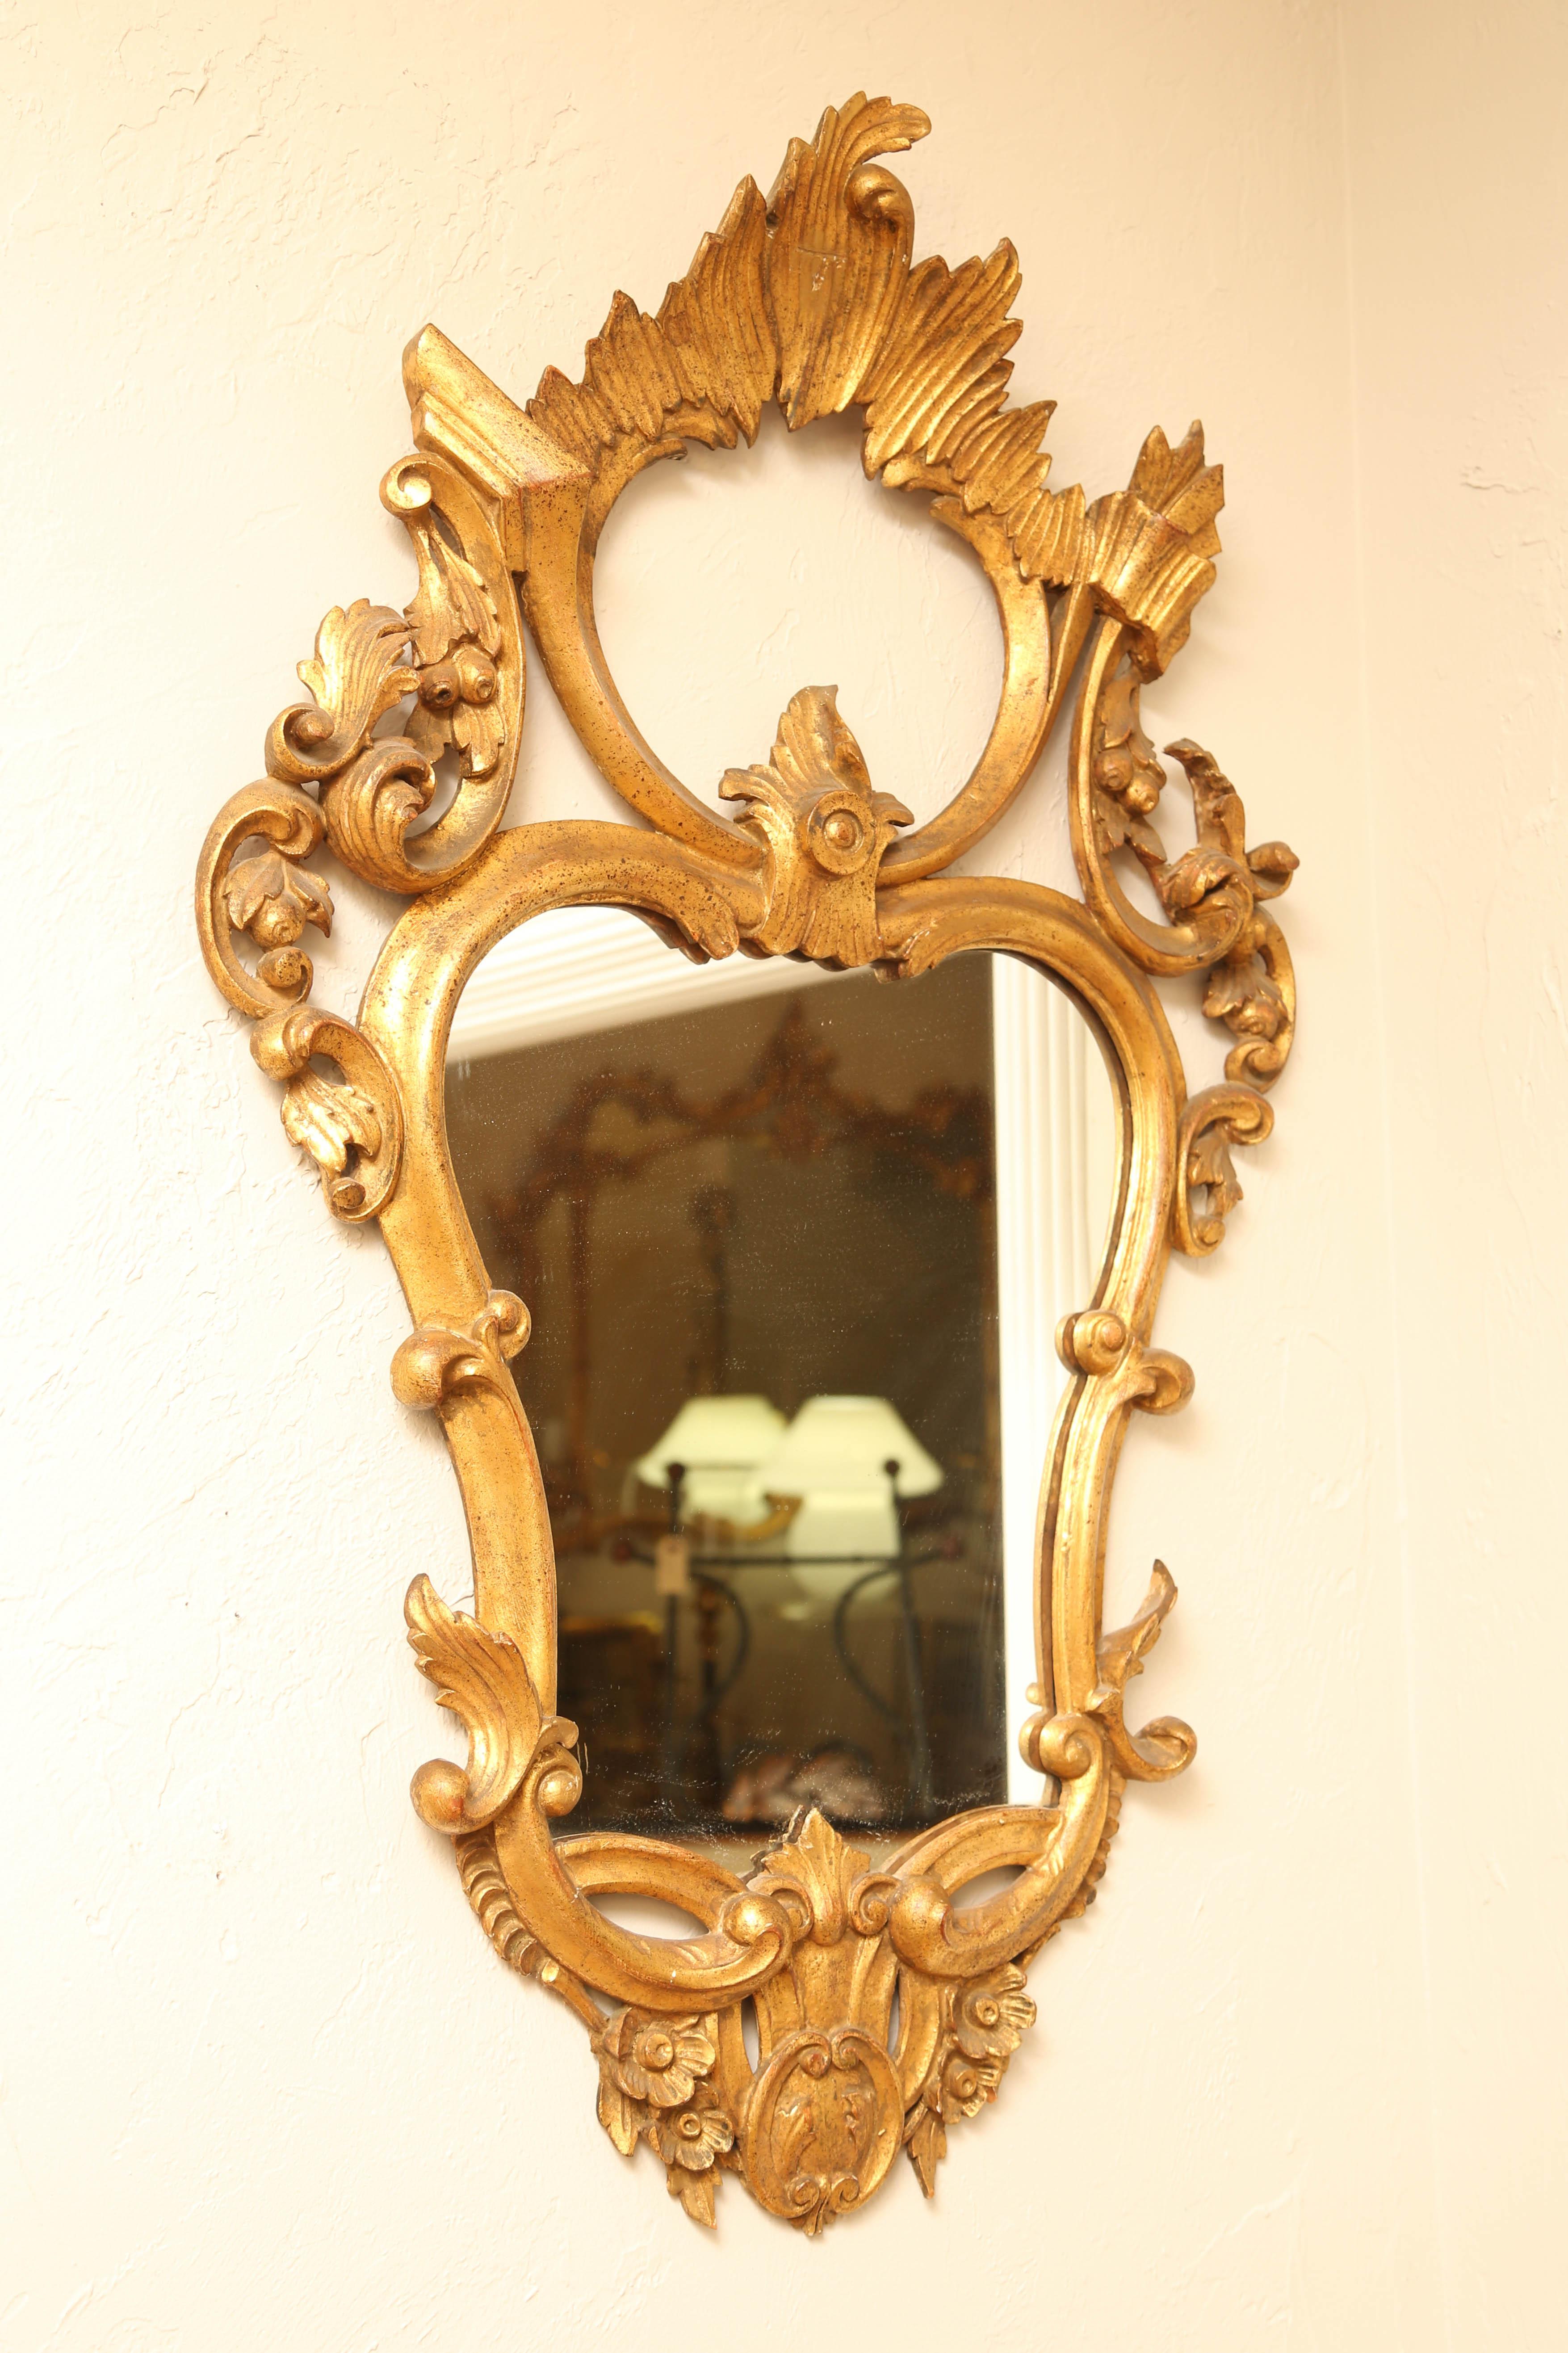 Carved and gilded shield shaped Rococo style Italian mirror.